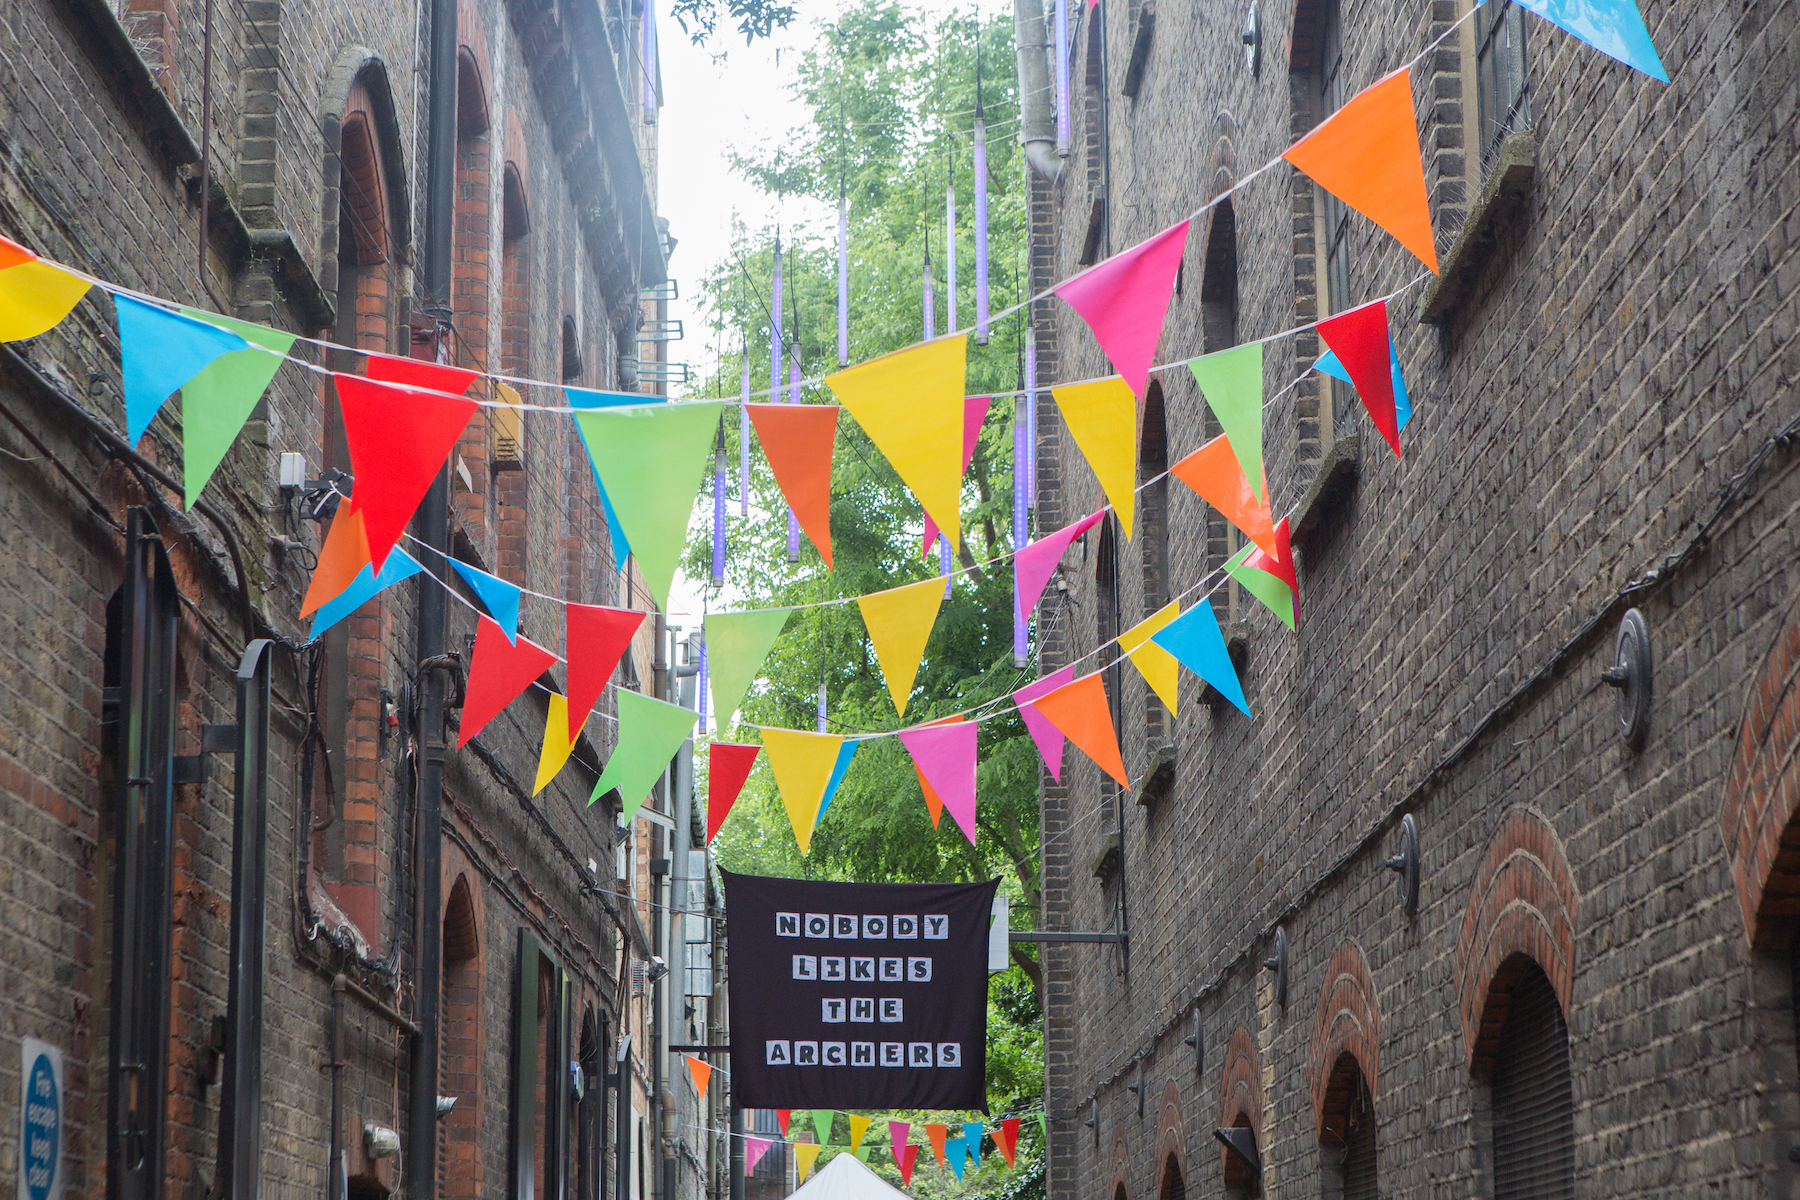 Outside the nunnery with bunting and installation